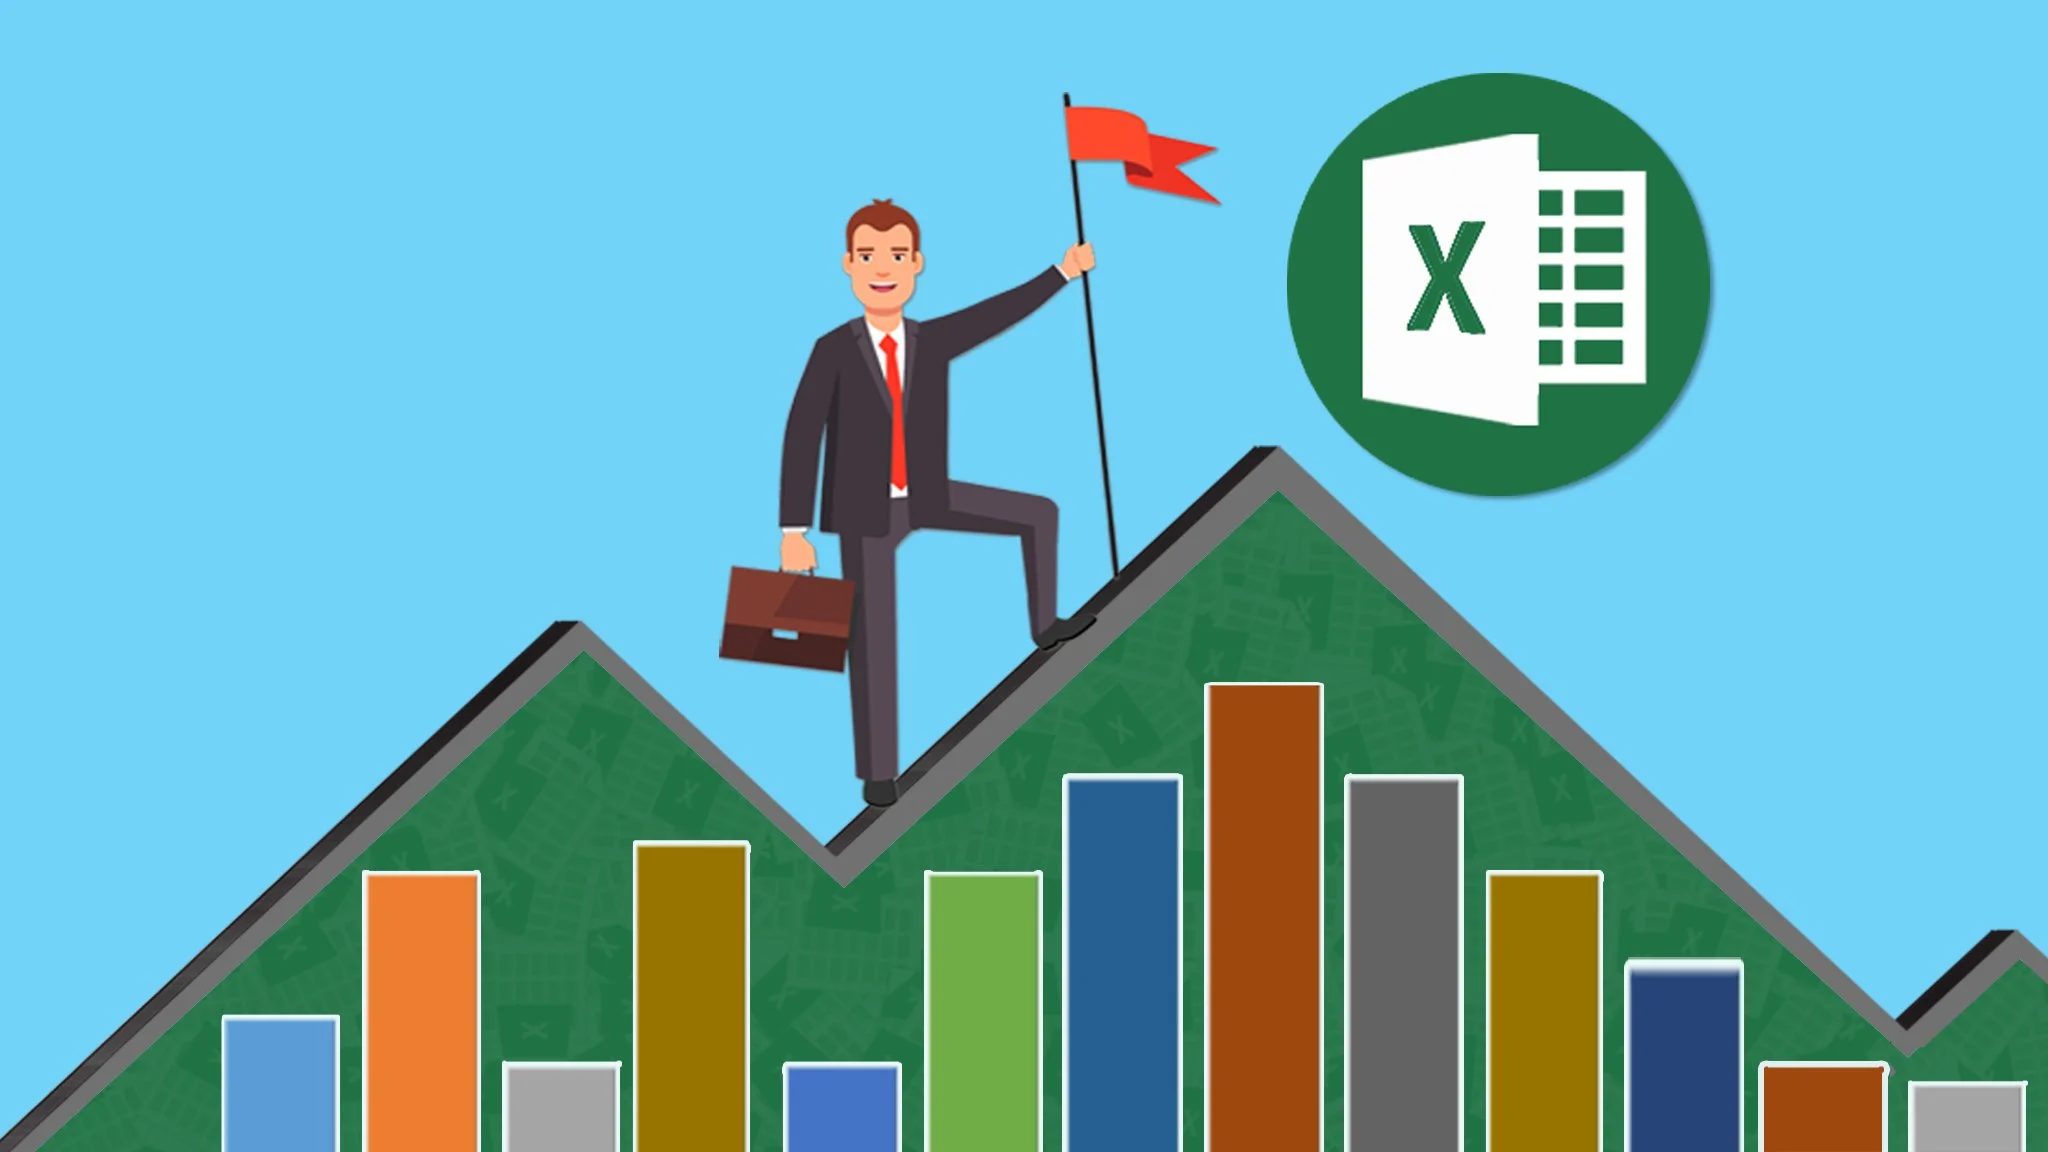 Illustration of a businessman with a briefcase and a flag, climbing a bar chart that leads up to a peak with an Excel logo, symbolizing success or proficiency in Excel.